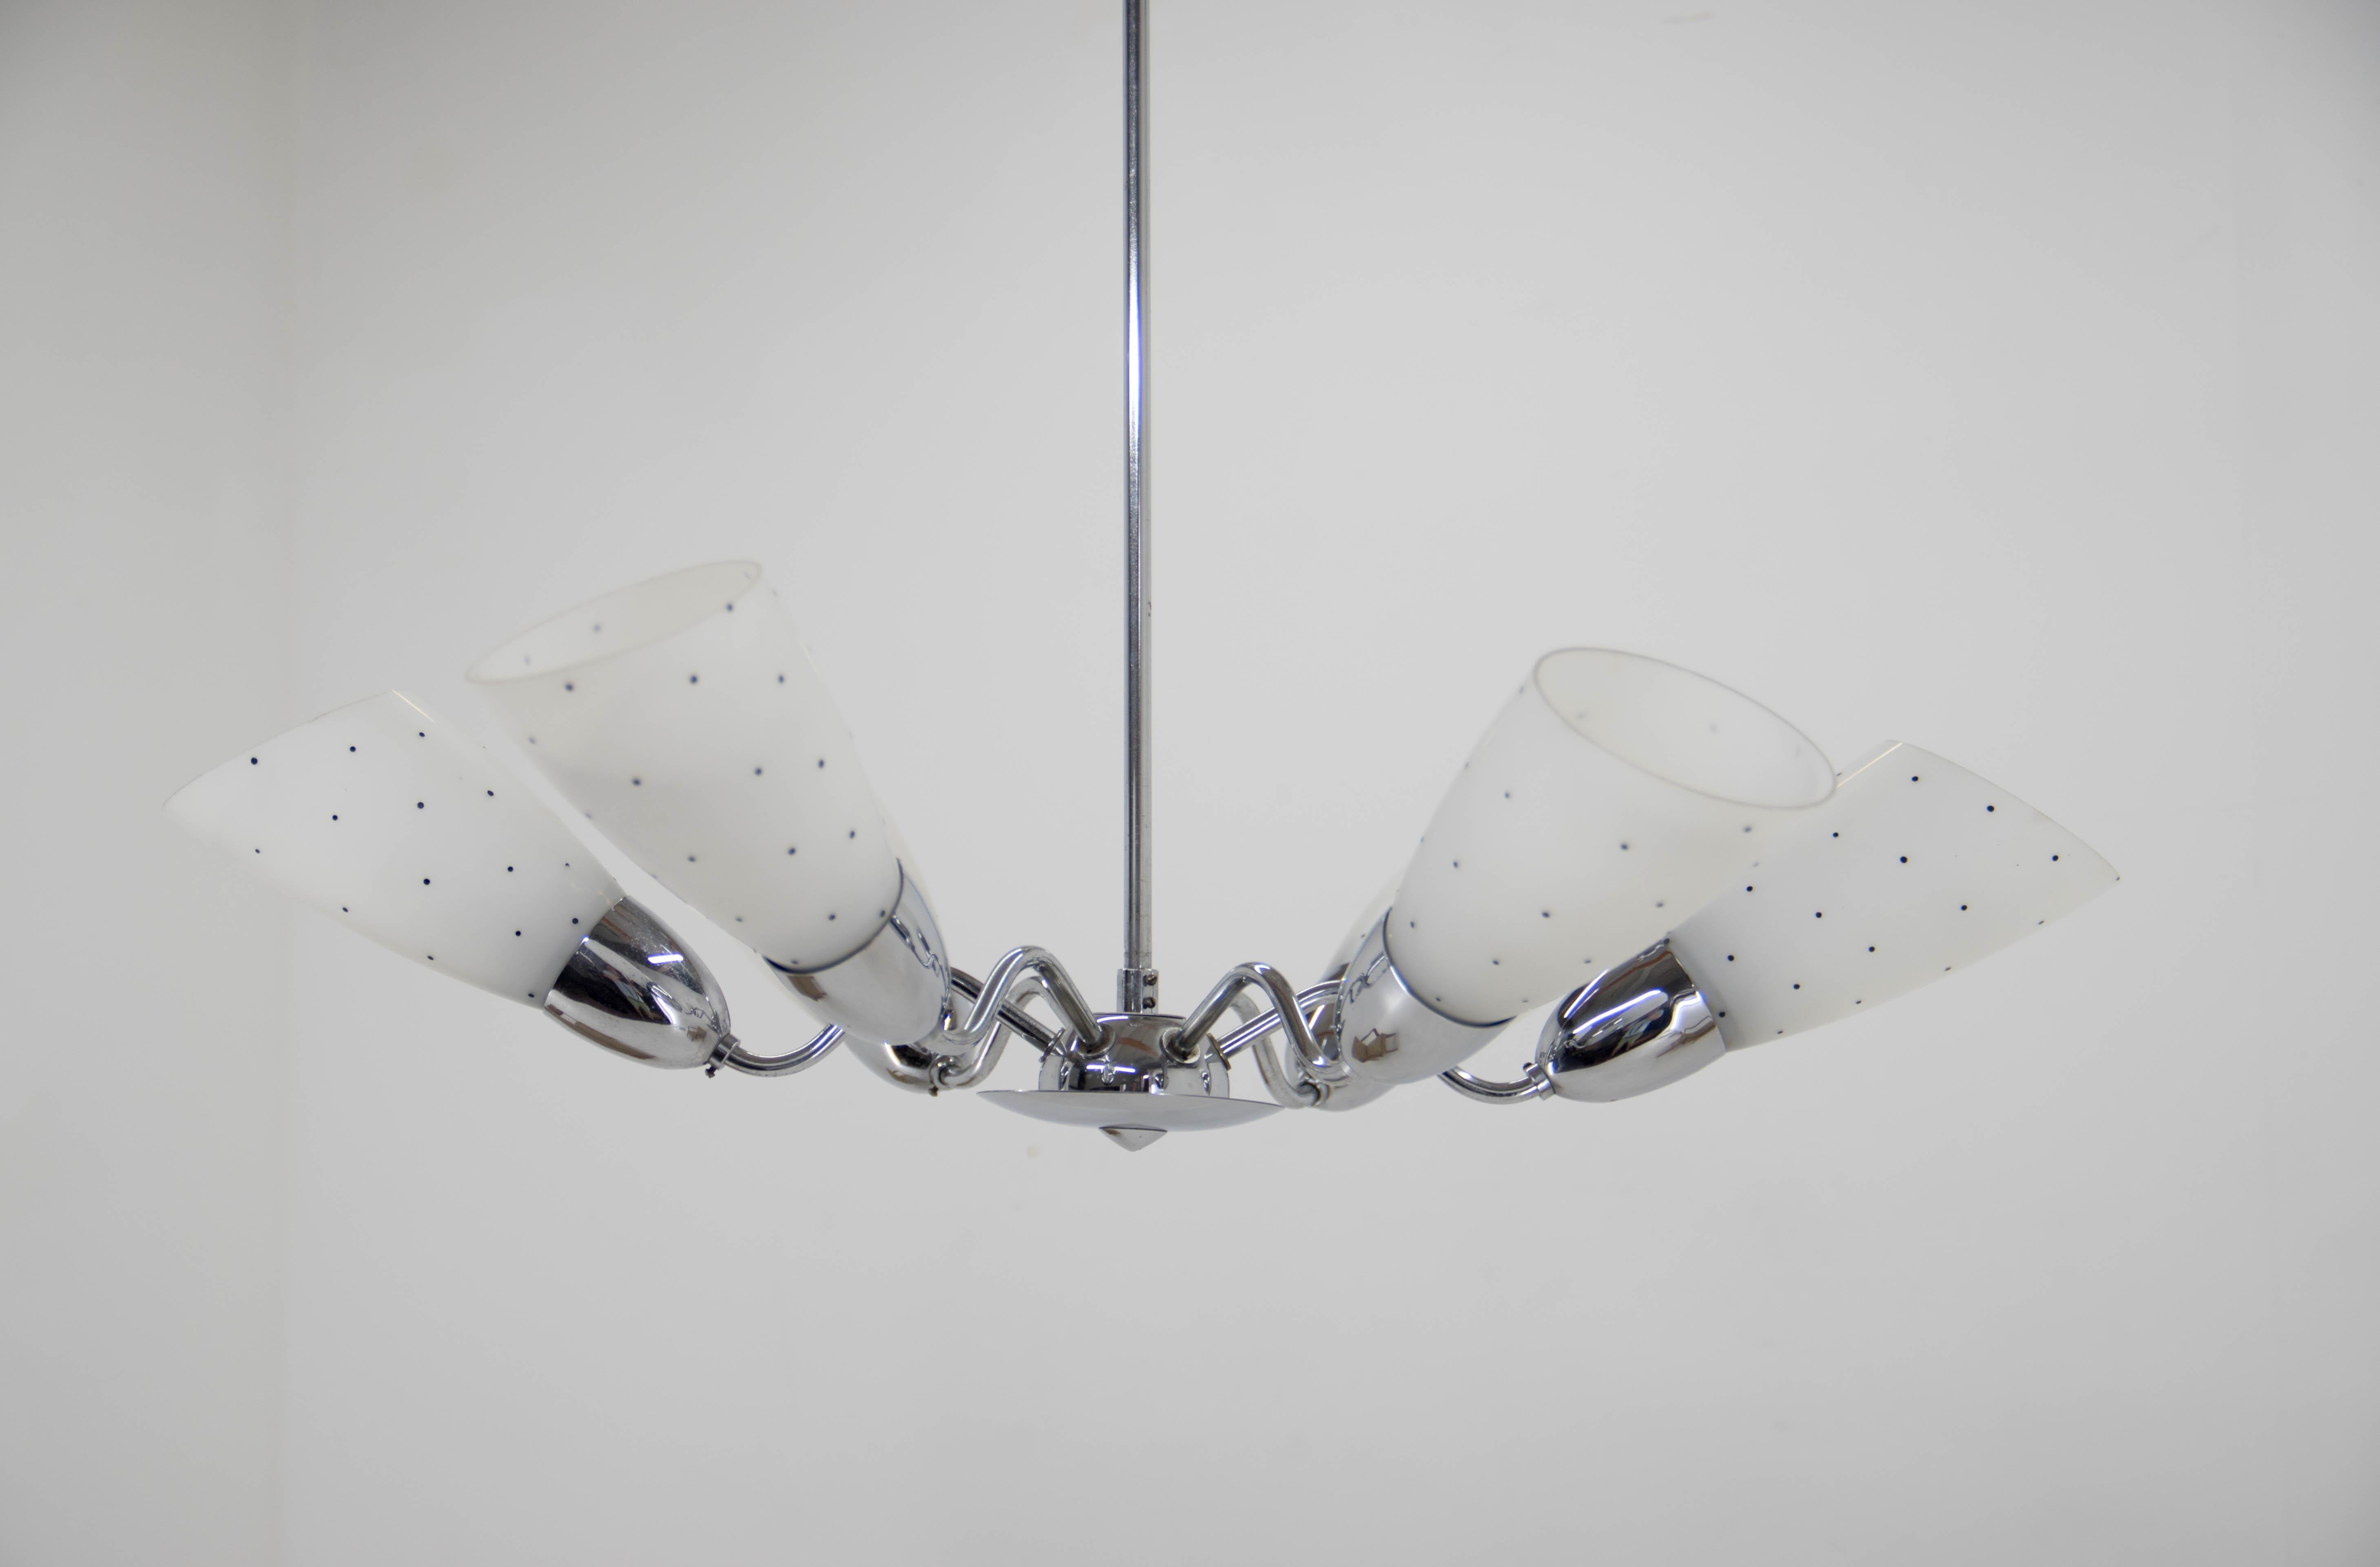 Czech Mid-Century Chrome-Plated 6 Flamming Chandelier by Instala Decin, 1950s For Sale